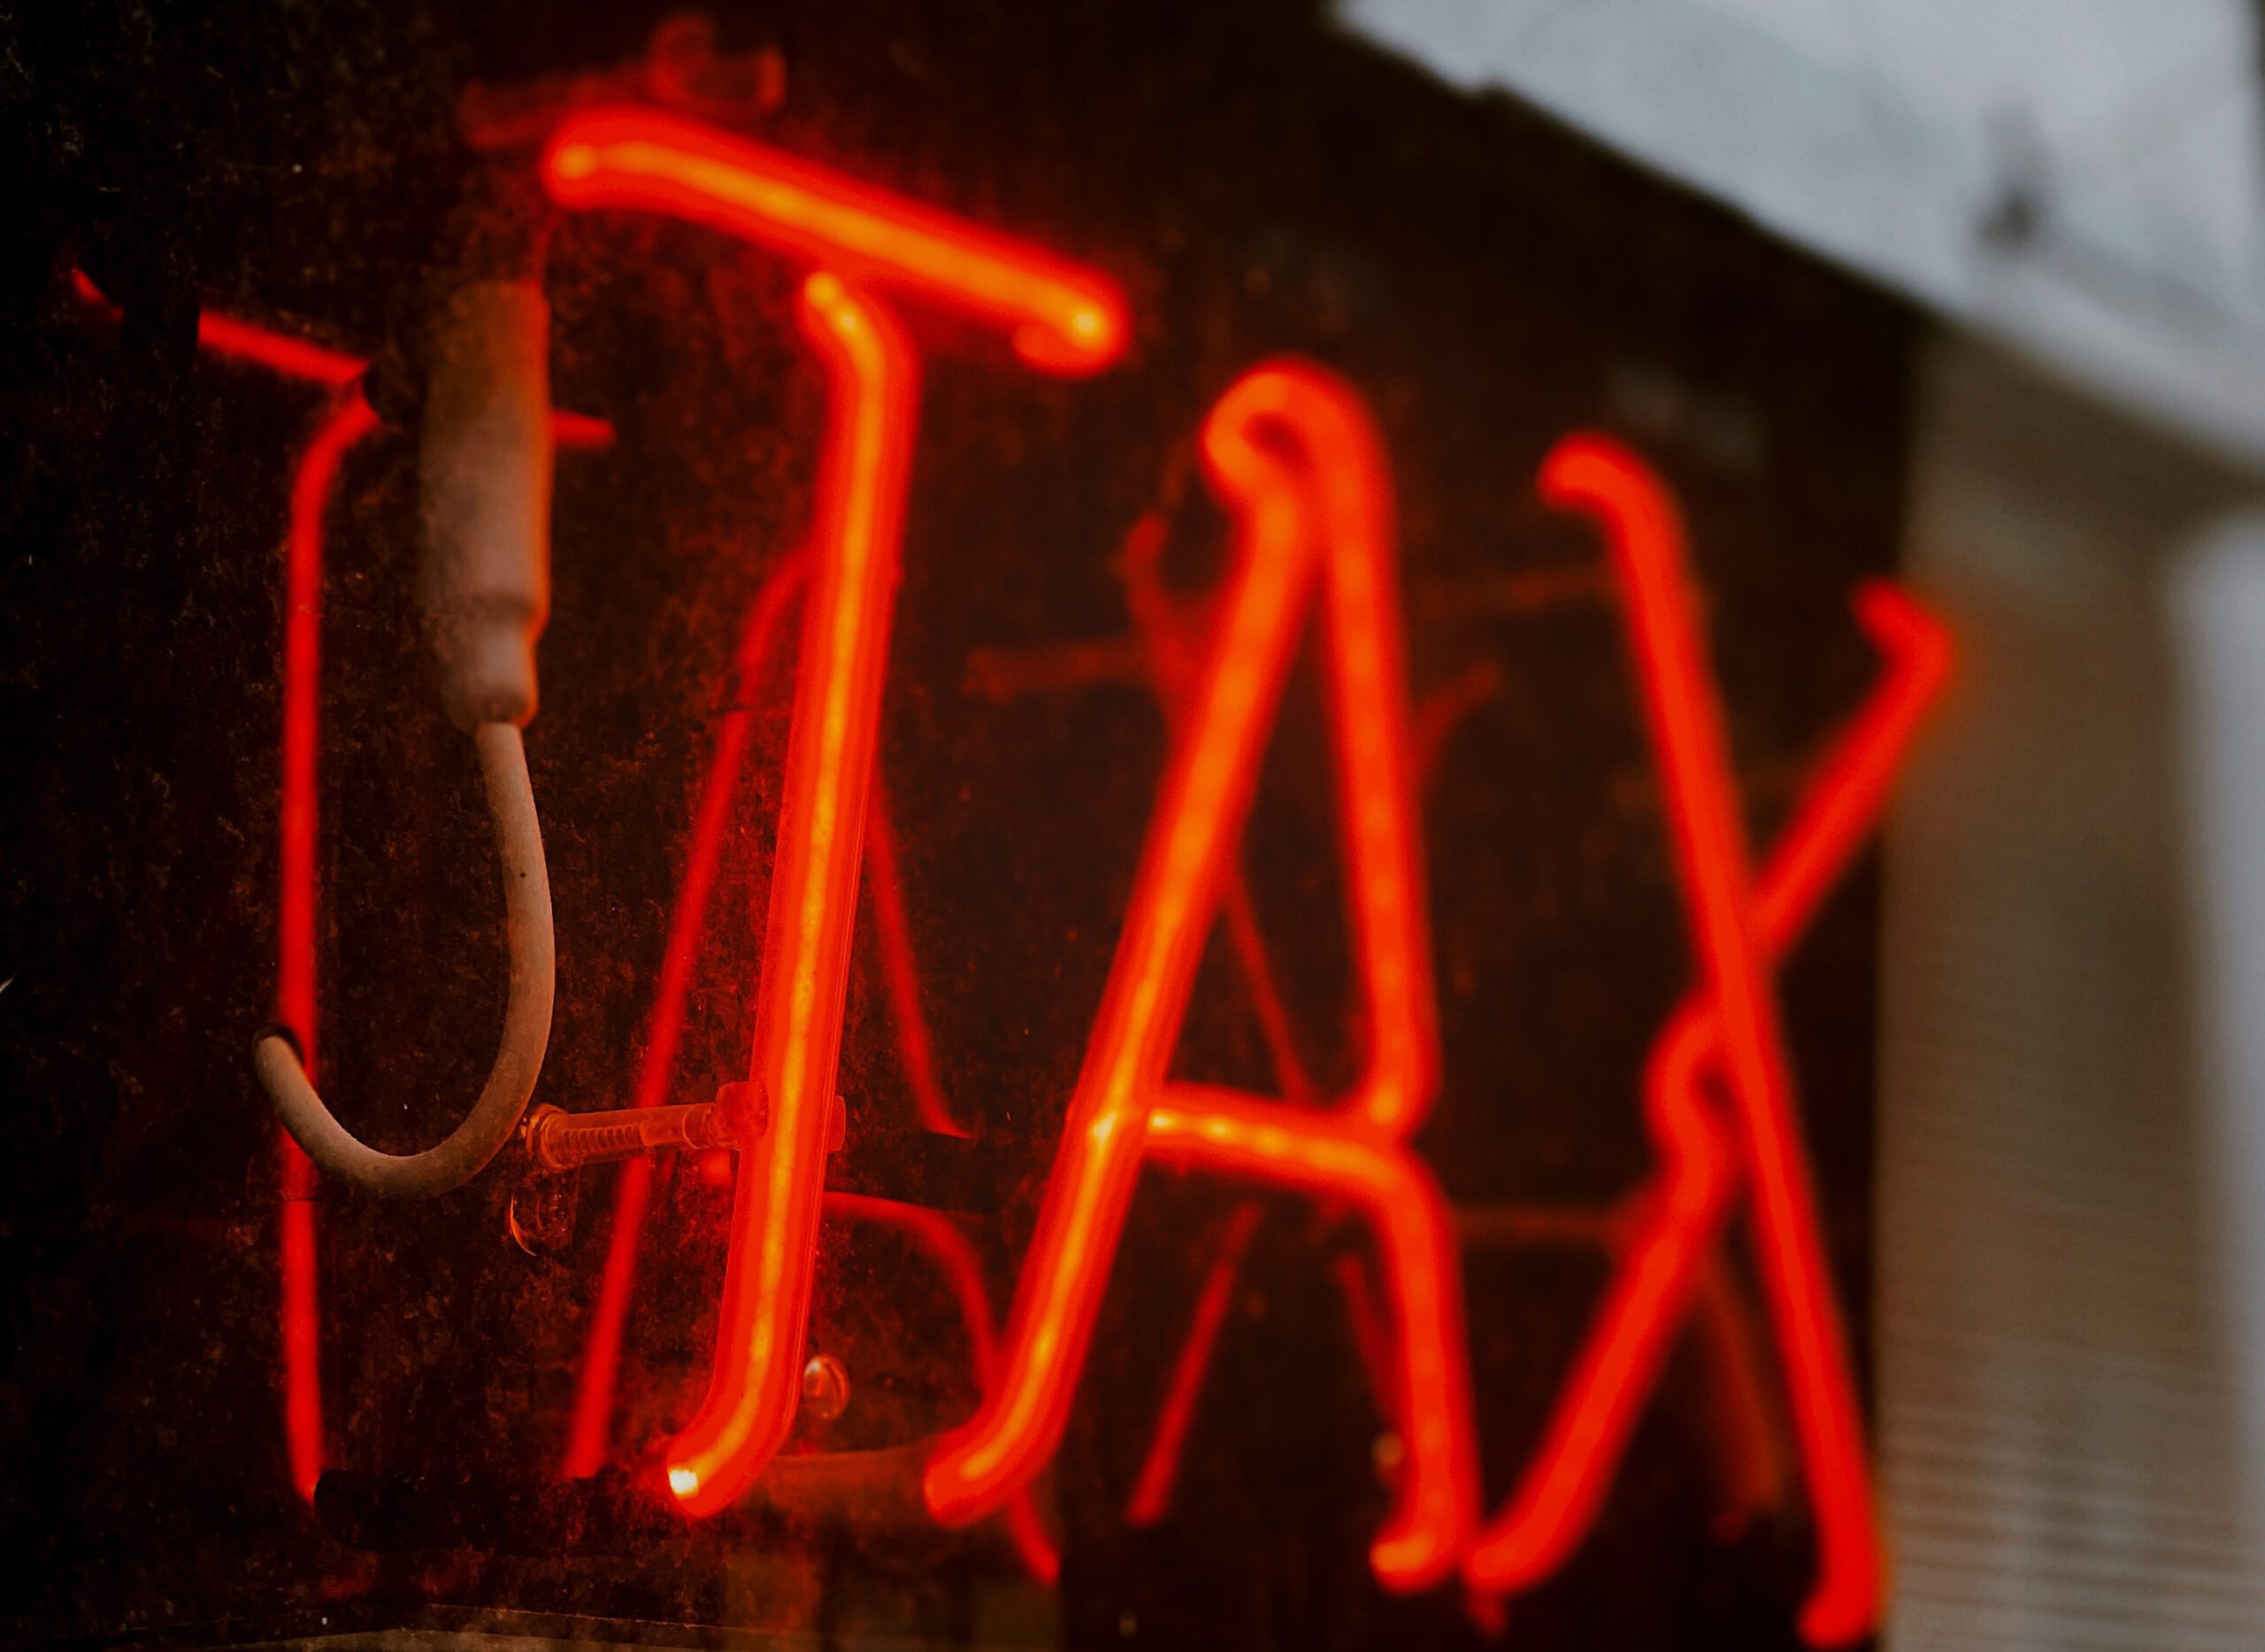 neon sign that spells tax, located inside a window of a business, drawing attention for 2022 tax filing season